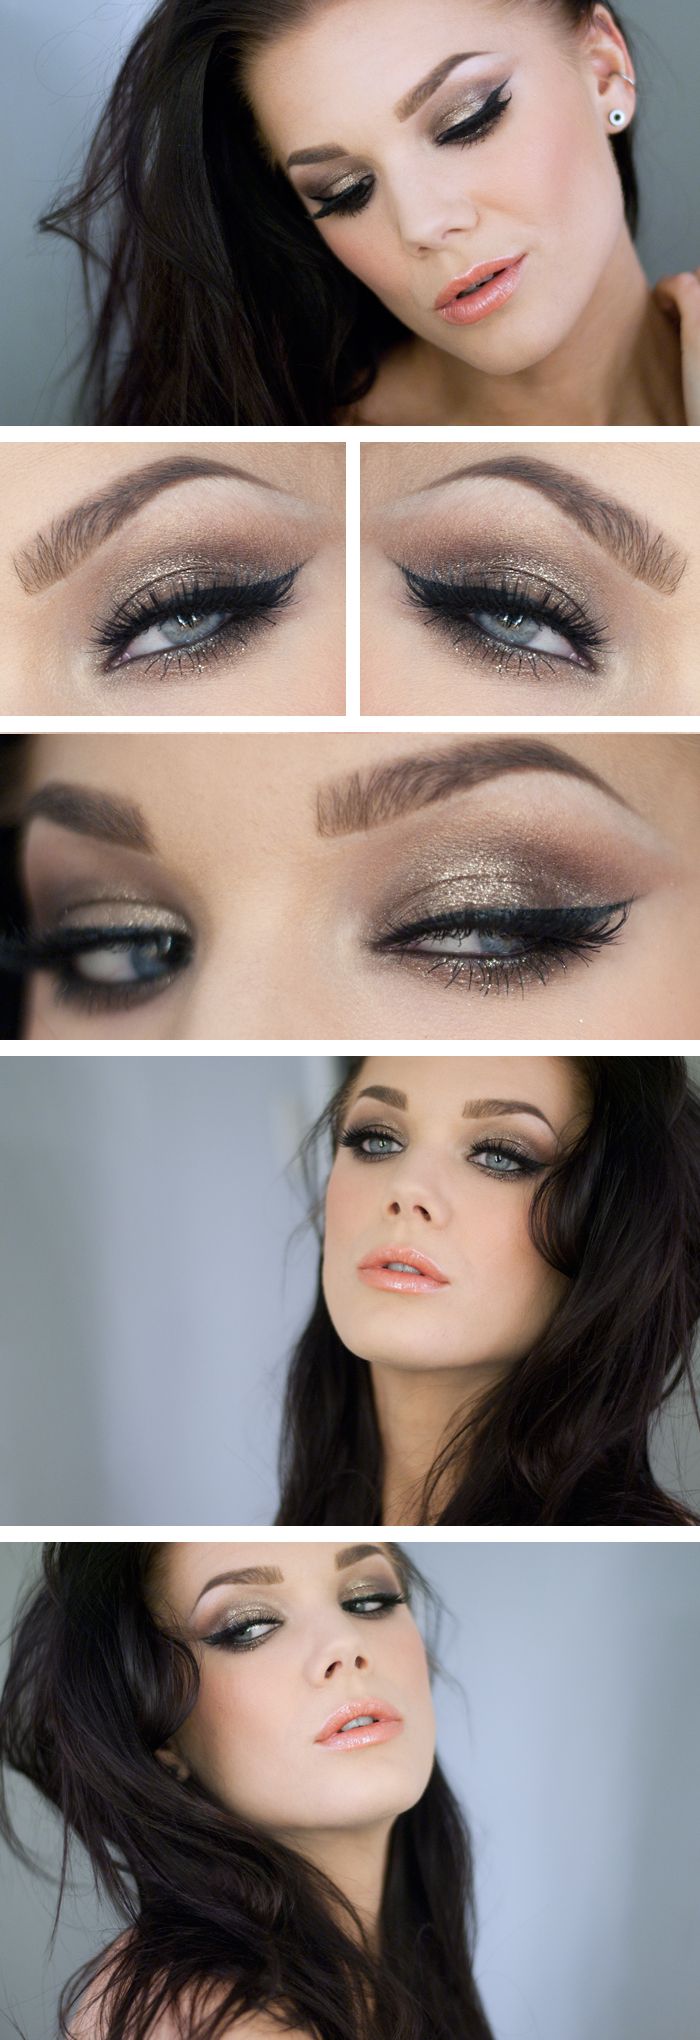 Simple Yet Stylish Light Makeup Ideas to Try for Daily Occasions ...